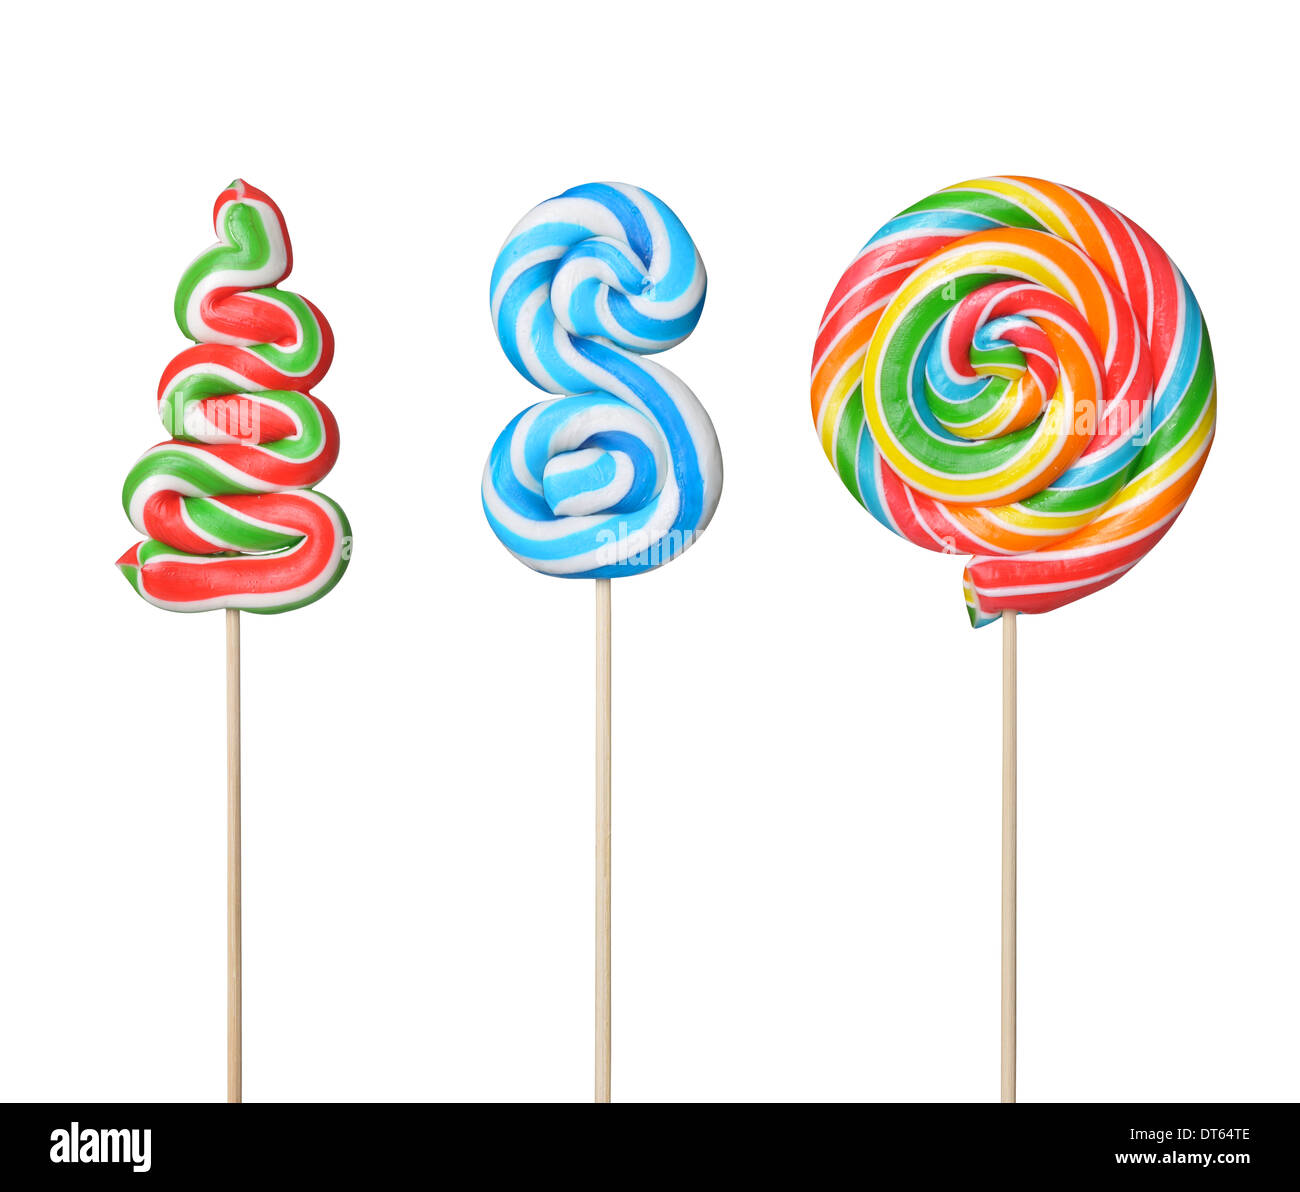 Colorful lollipop isolated on white background Stock Photo